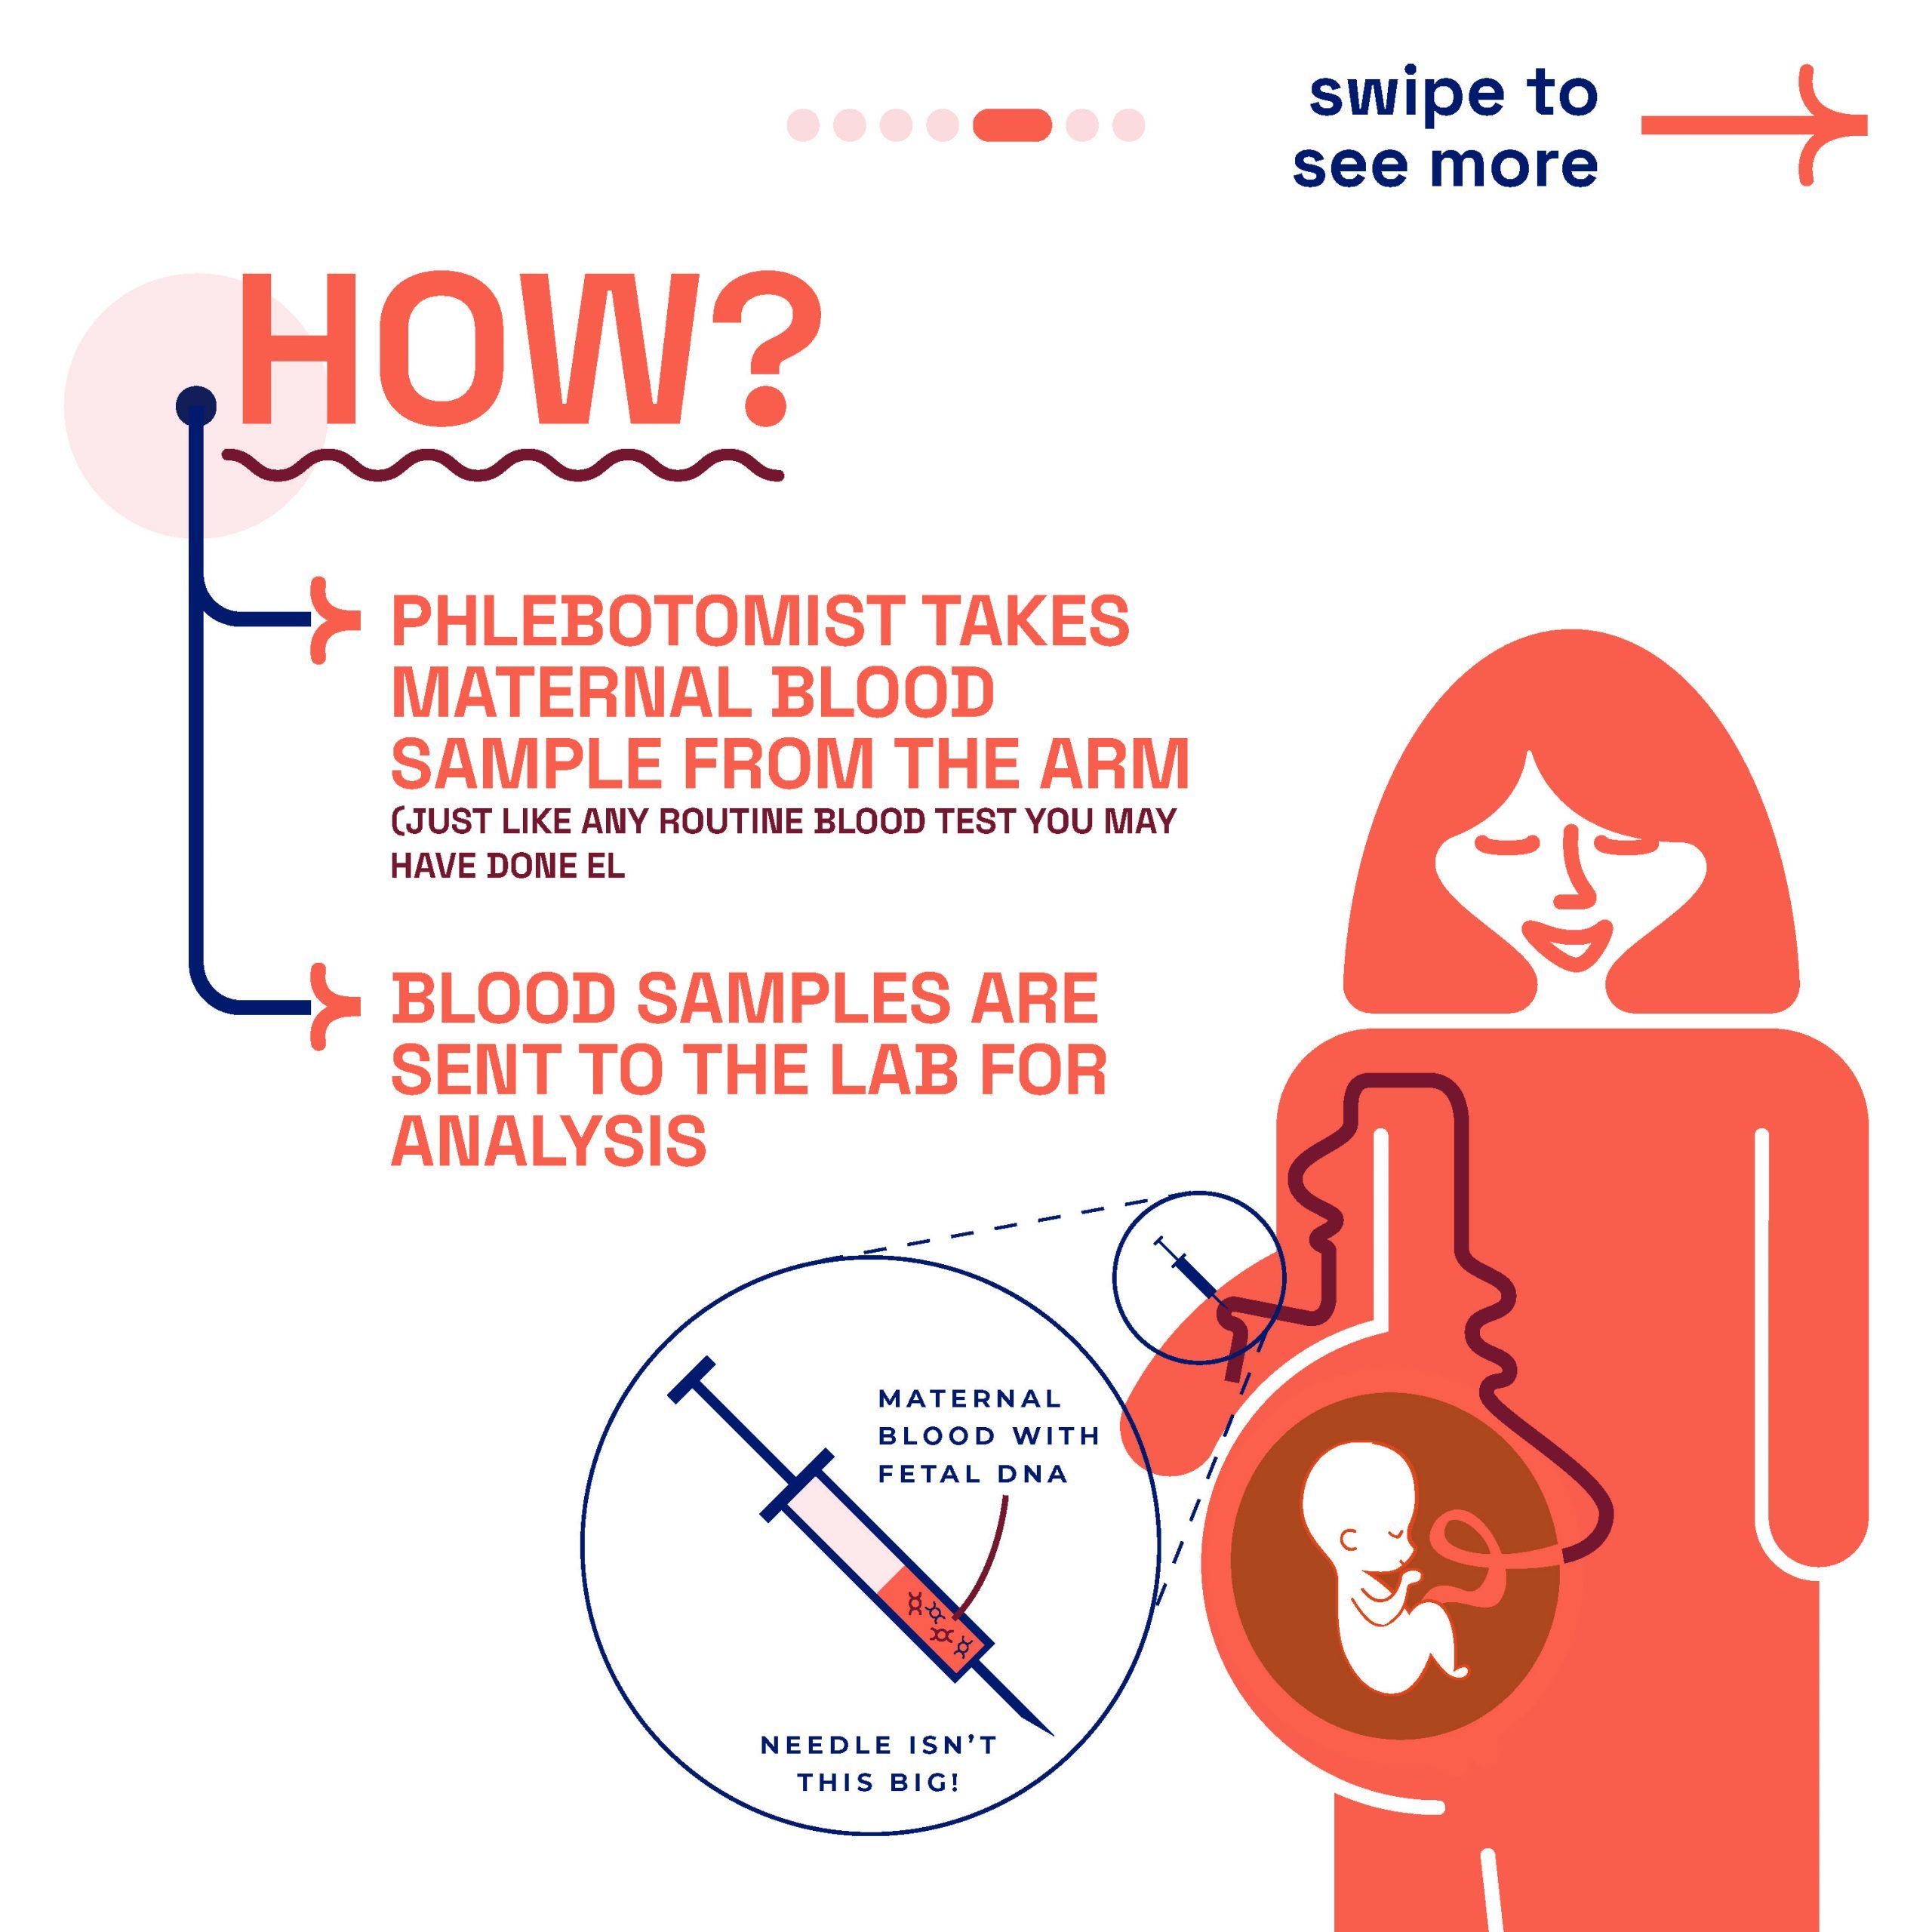 Illustrative guide by London Pregnancy Clinic on how NIPT is performed, showing a phlebotomist taking a blood sample and the process of lab analysis for fetal DNA.